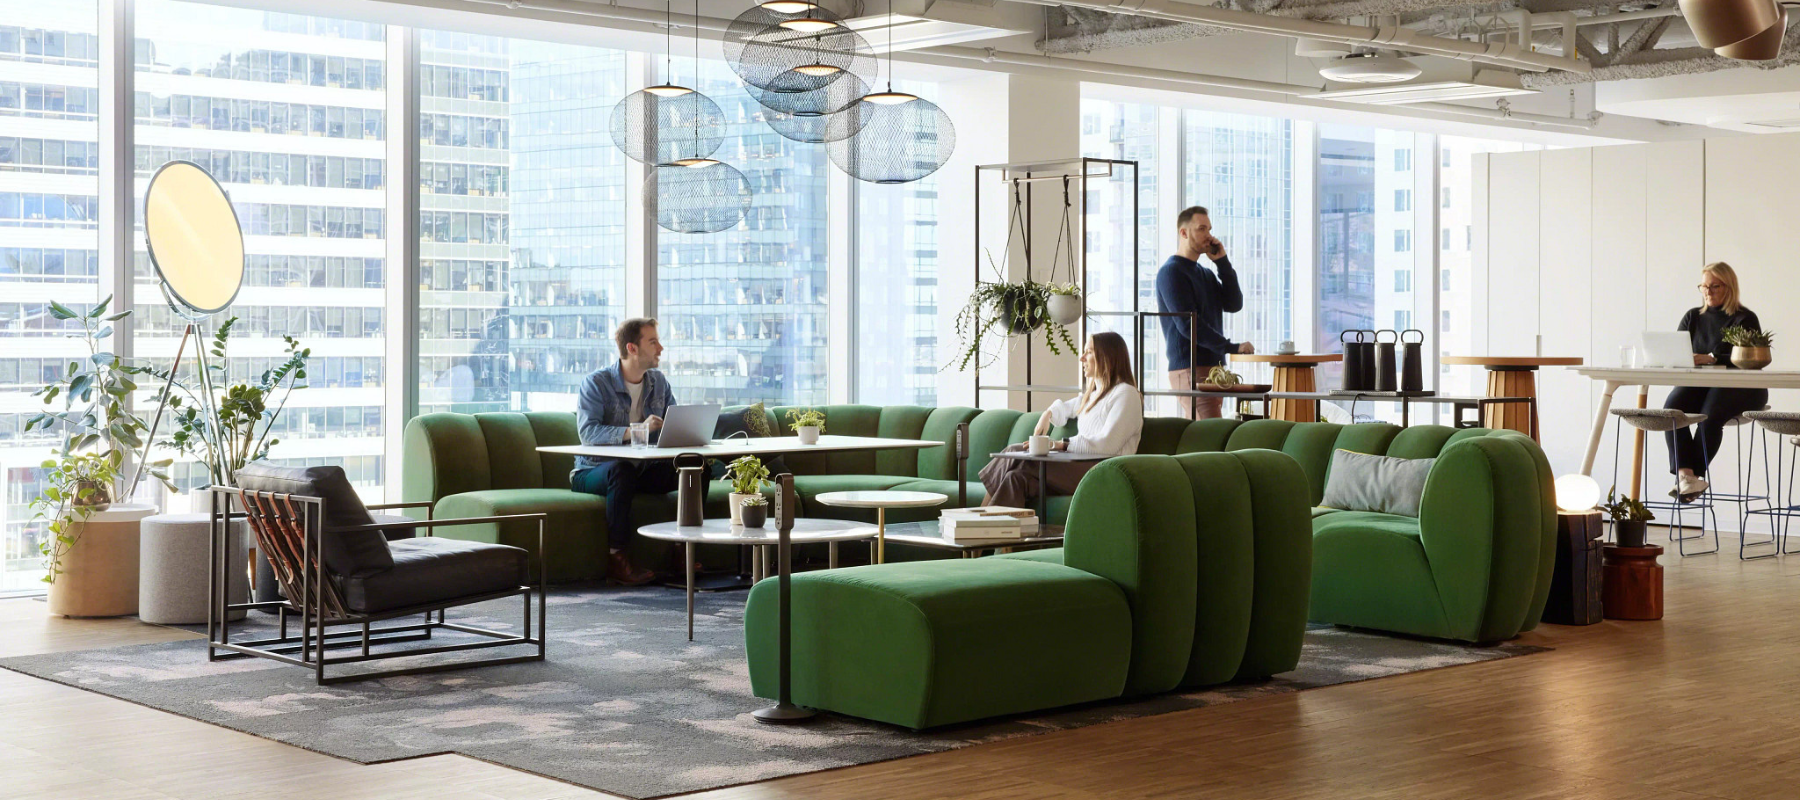 workplace with a social area featuring a green west elm couch, also with more focus spaces behind it